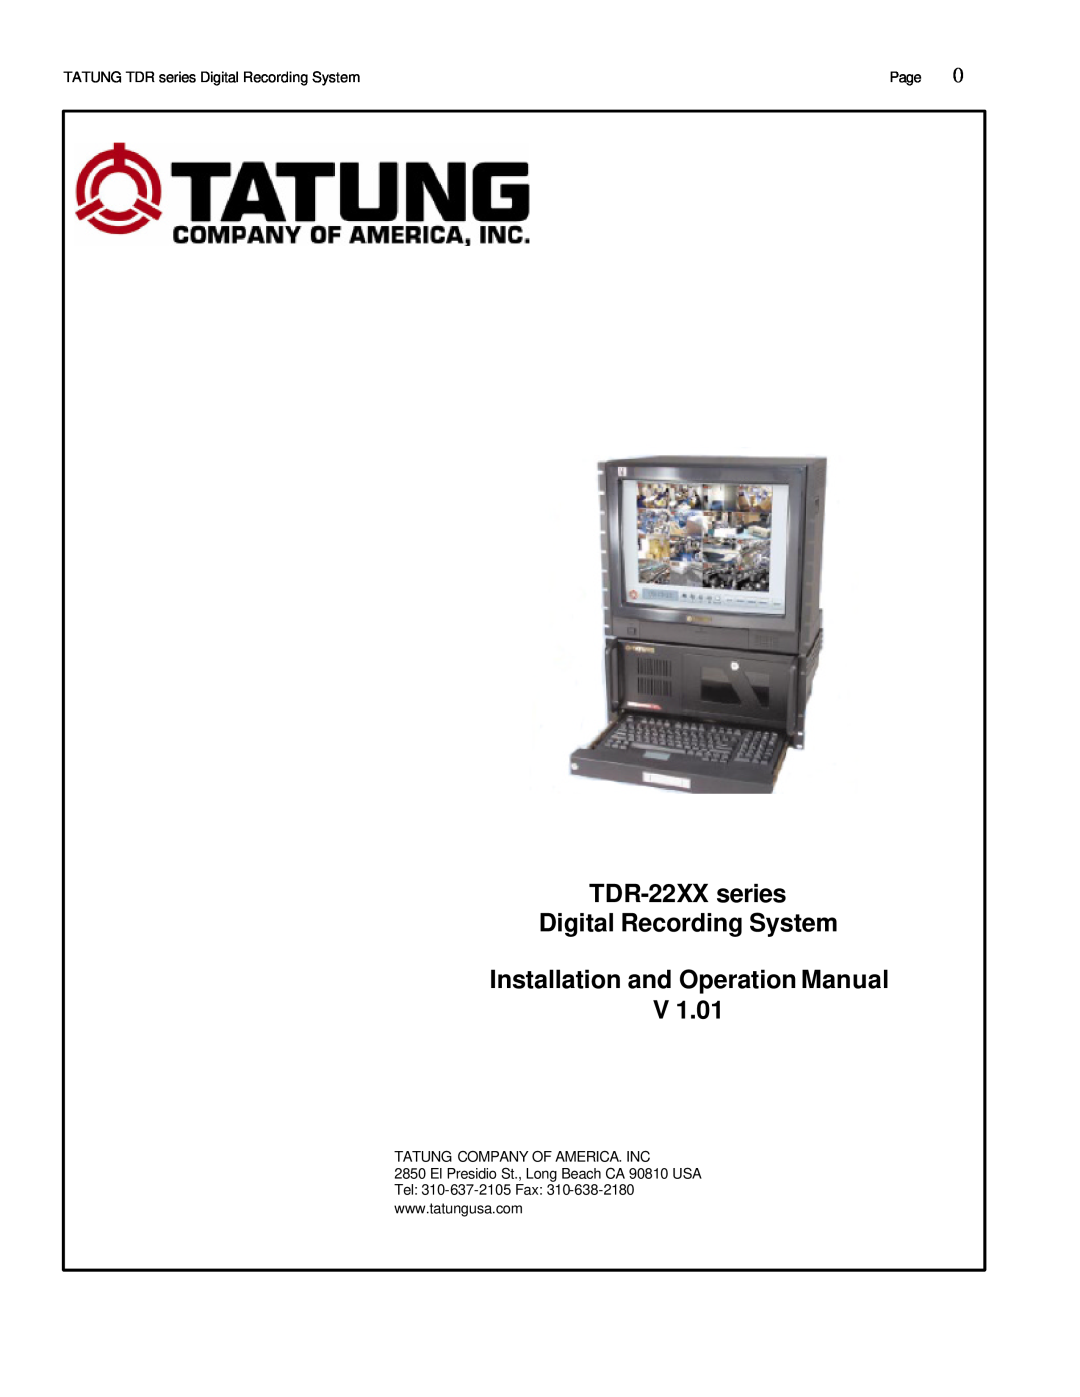 Tatung operation manual TDR-22XX series Digital Recording System, Installation and Operation Manual V, Page 